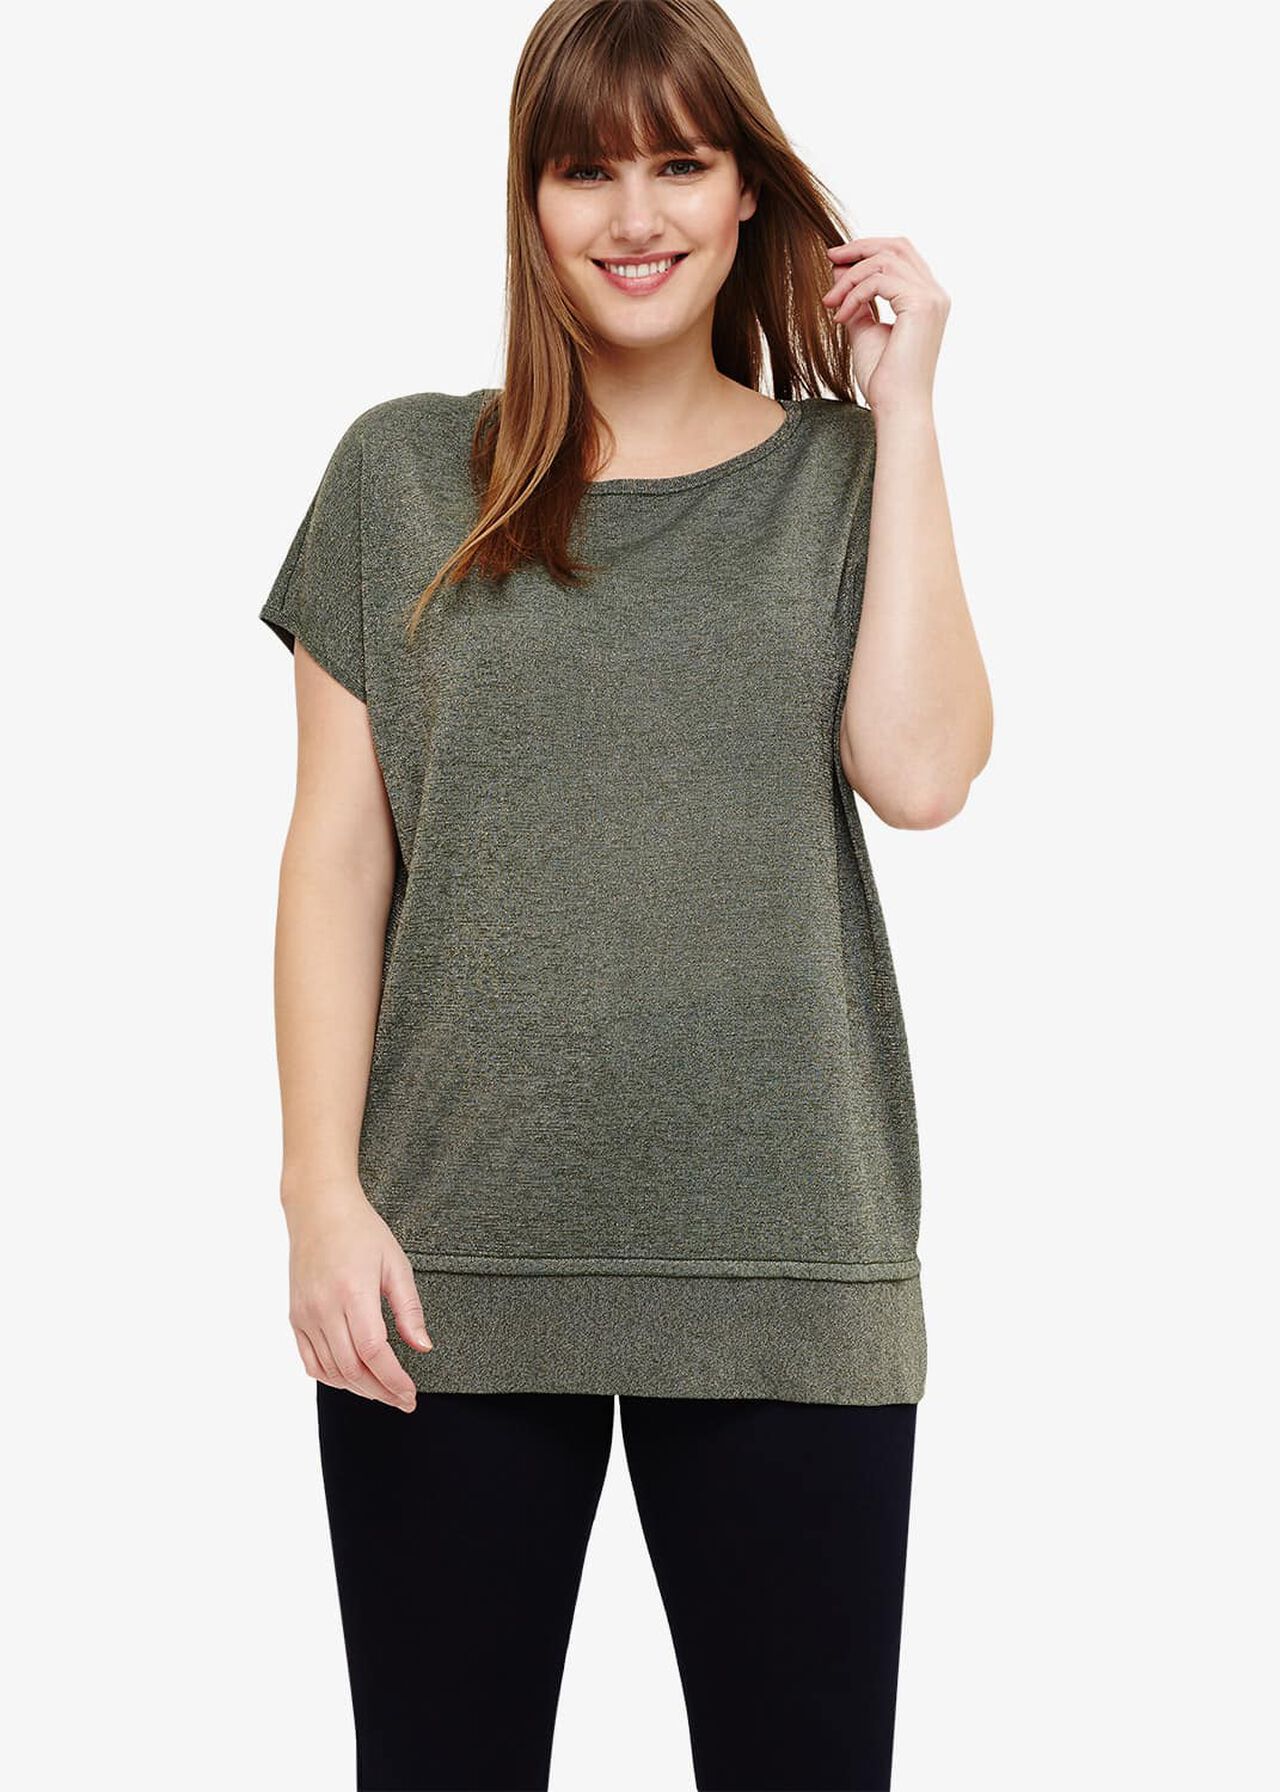 Quinzy Shimmer Knit Top